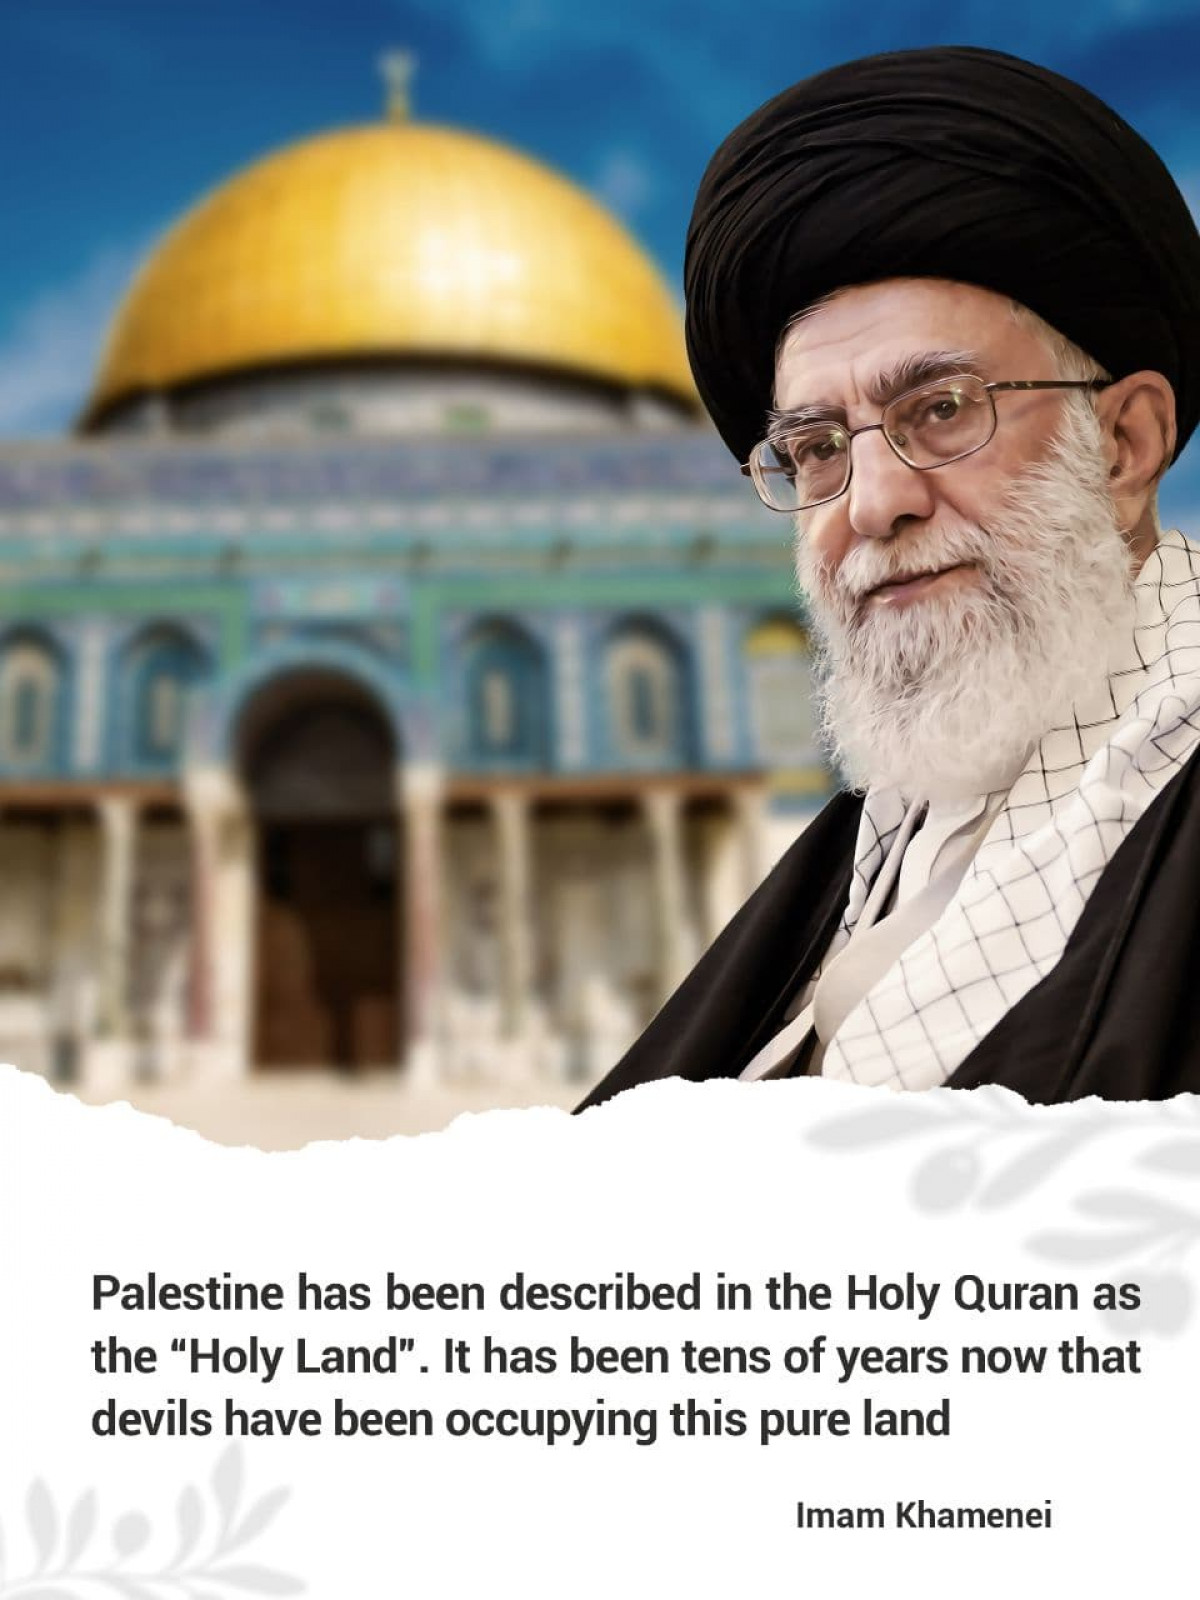 Palestine has been described in the Holy Quran as the "Holy Land"